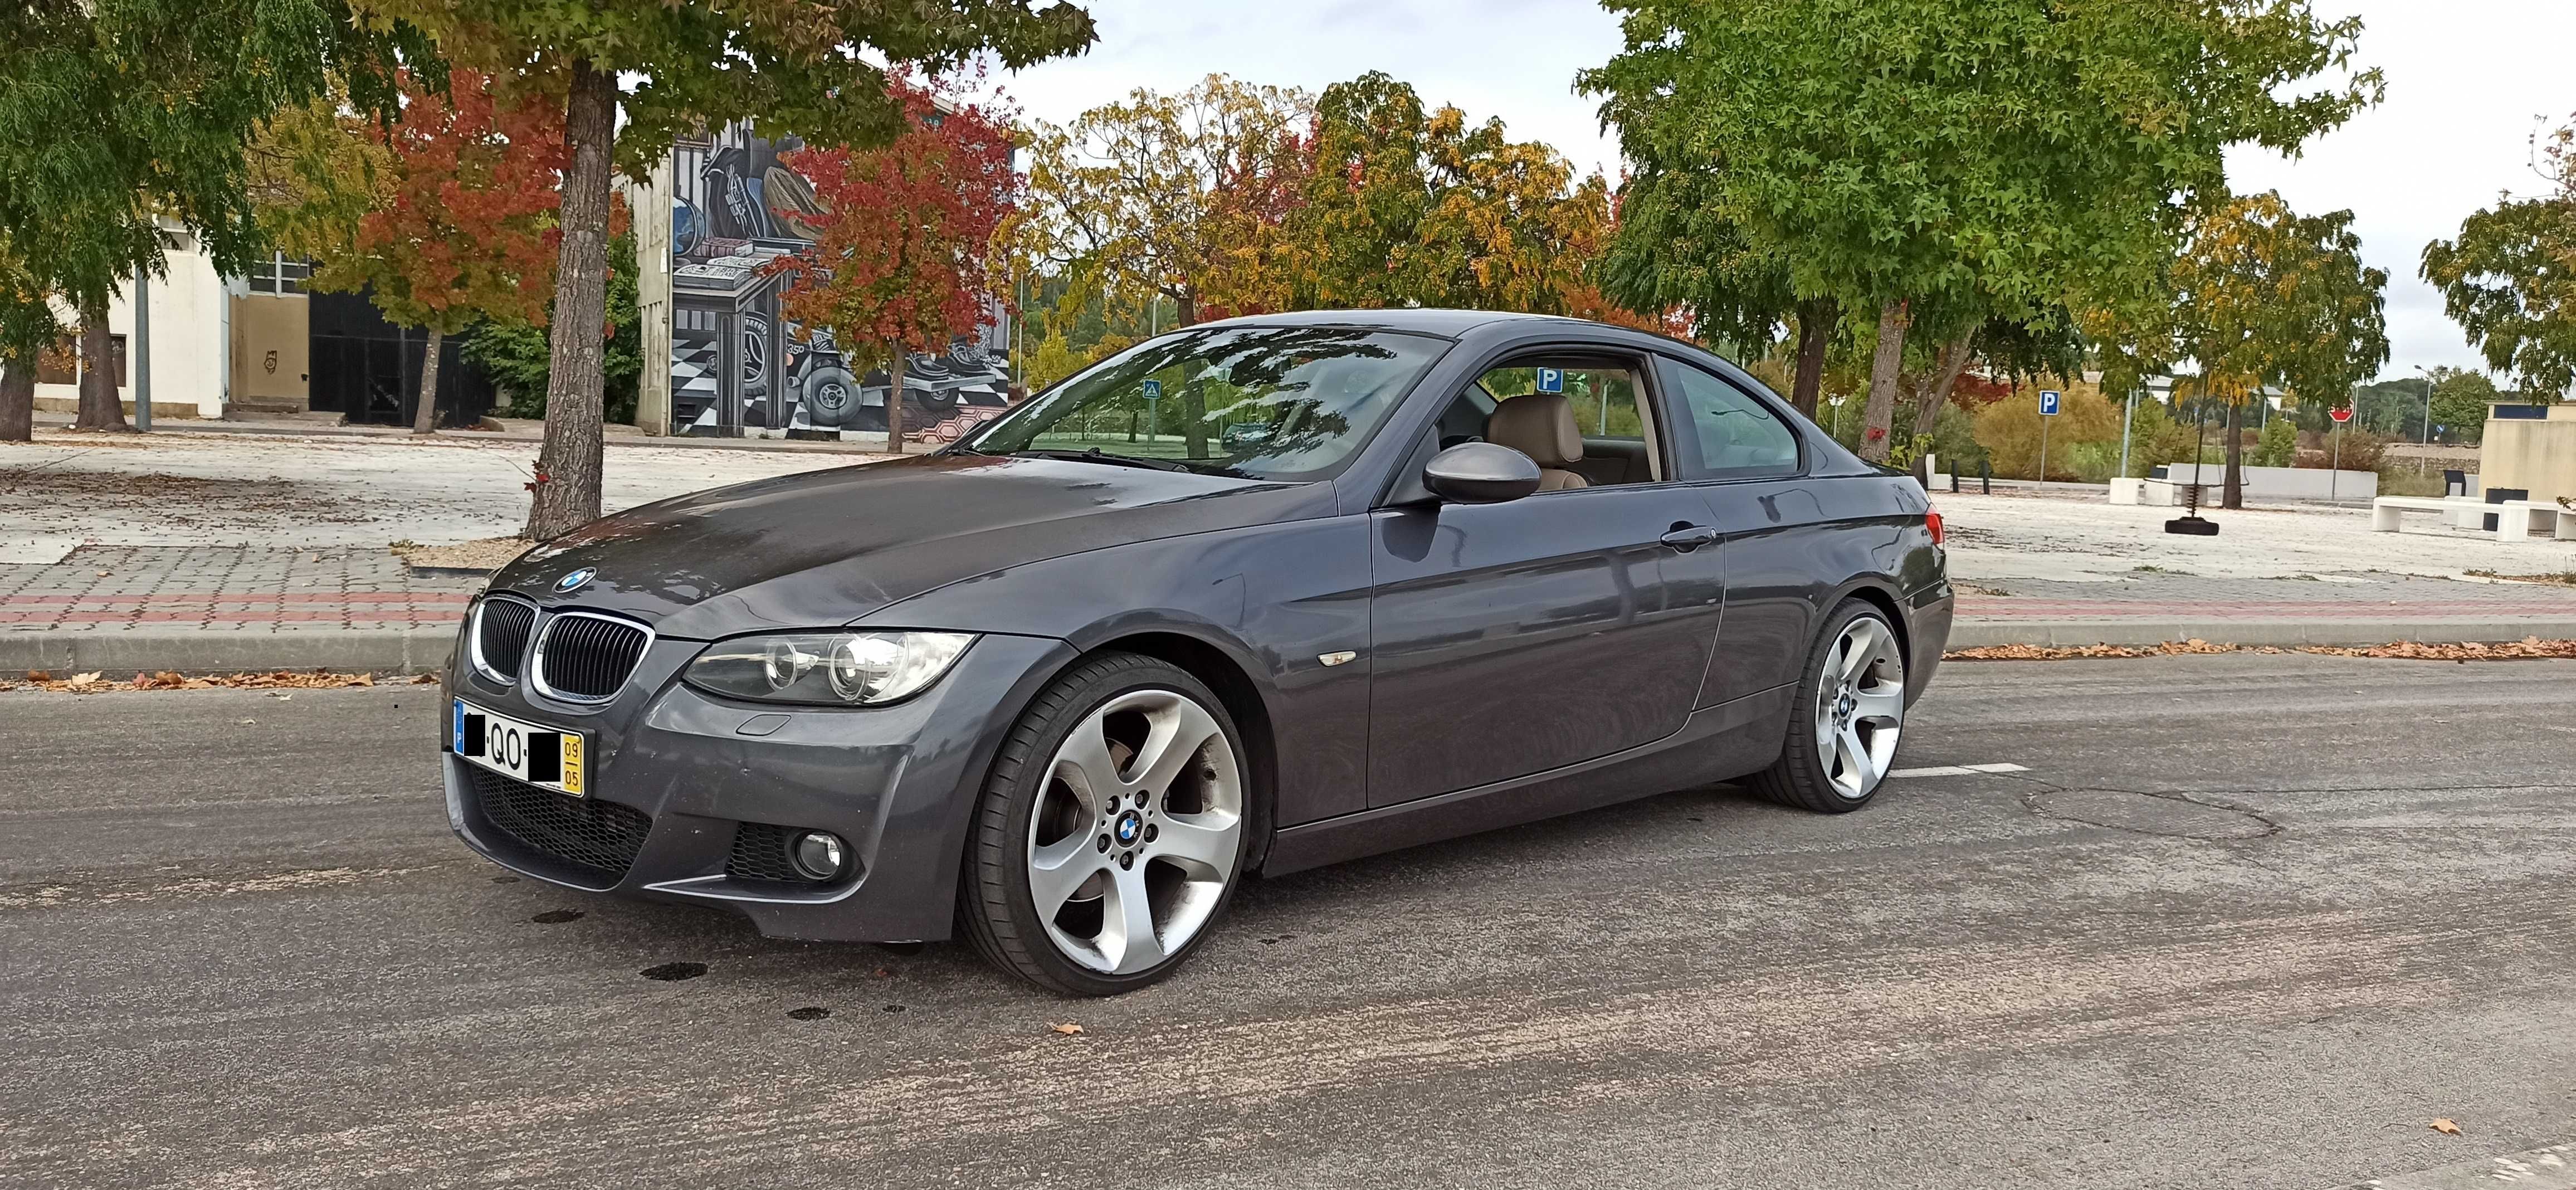 BMW 320D Coupe 2009